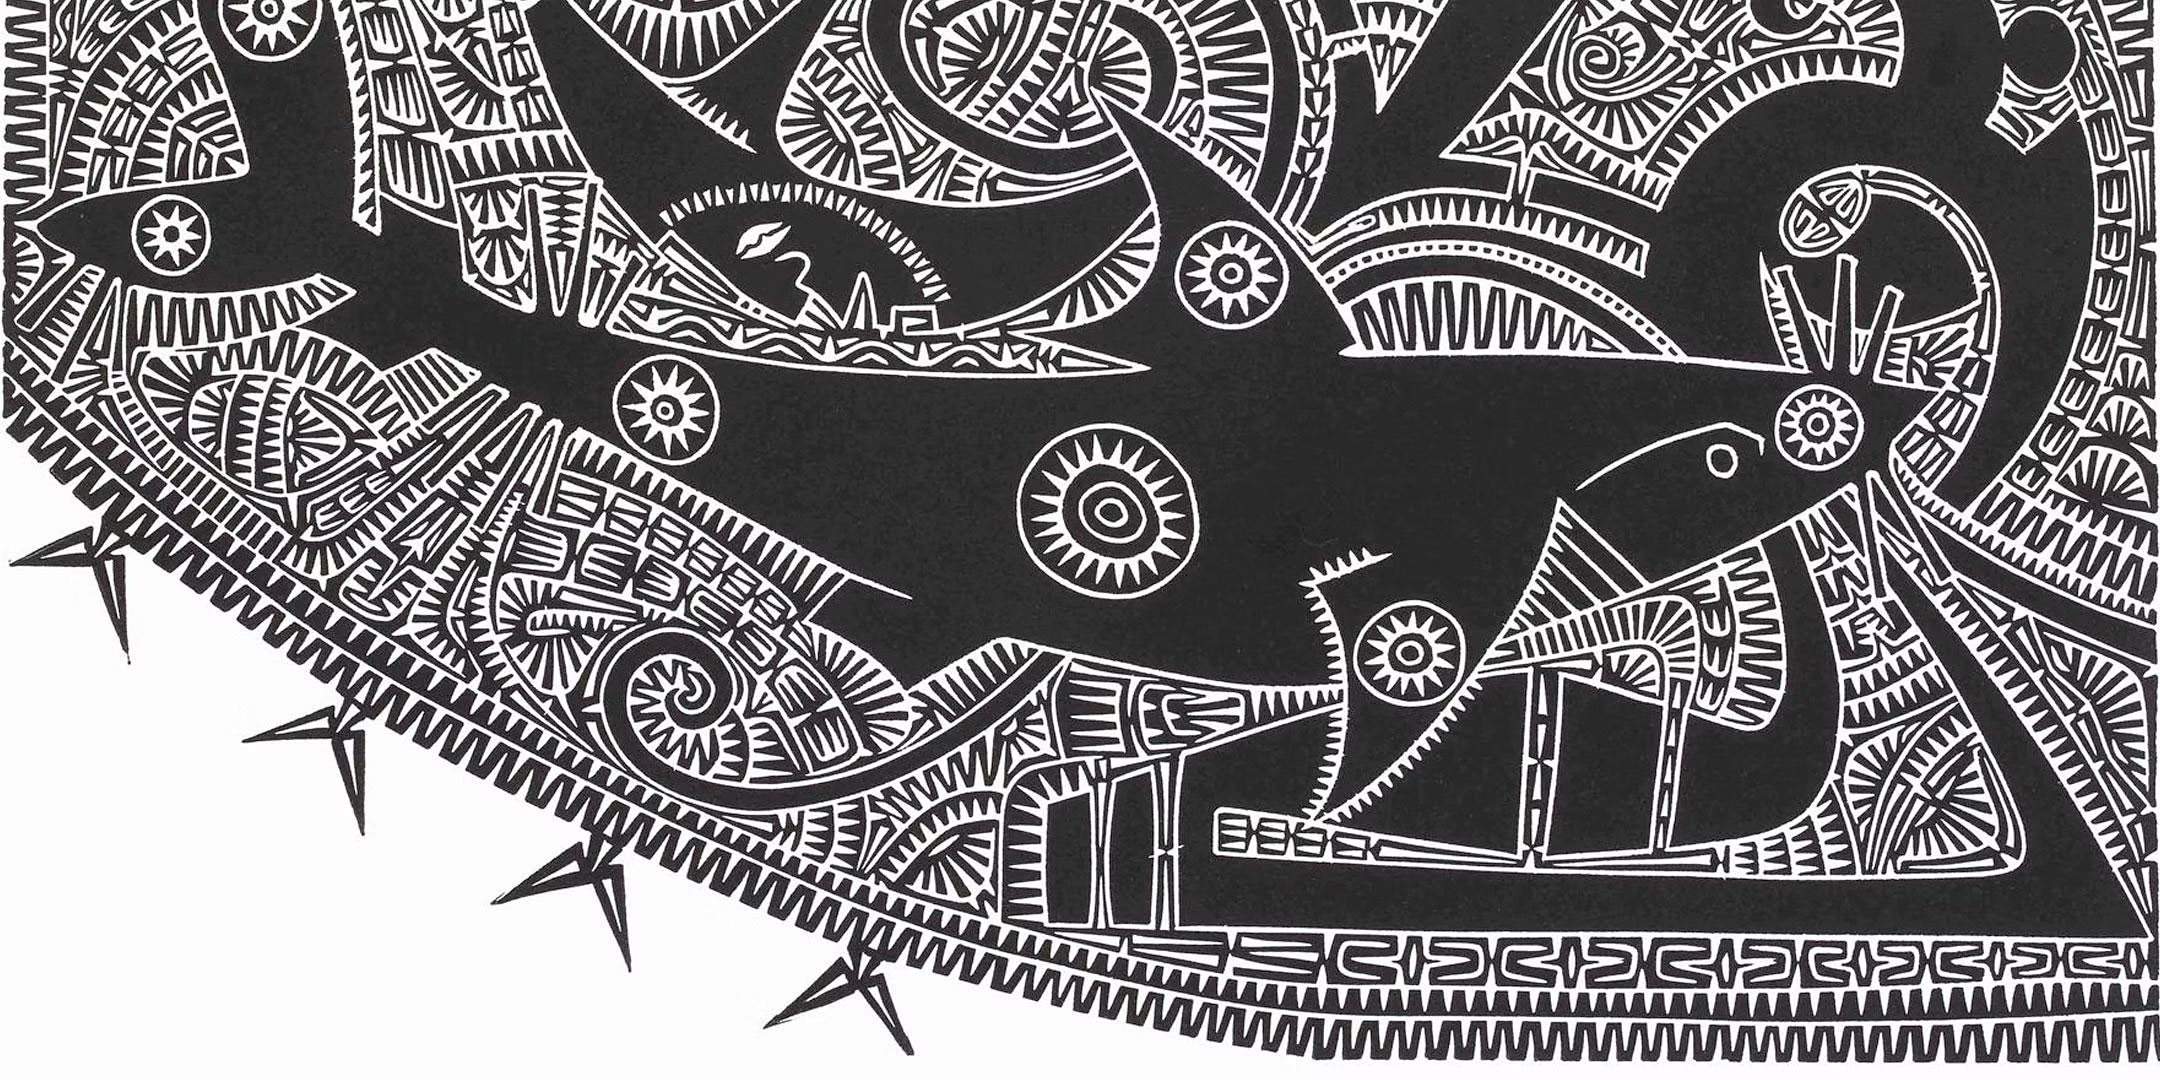 Black and white lino print of a shark with other patterns and shapes within the background. Artist:Brian Robinson